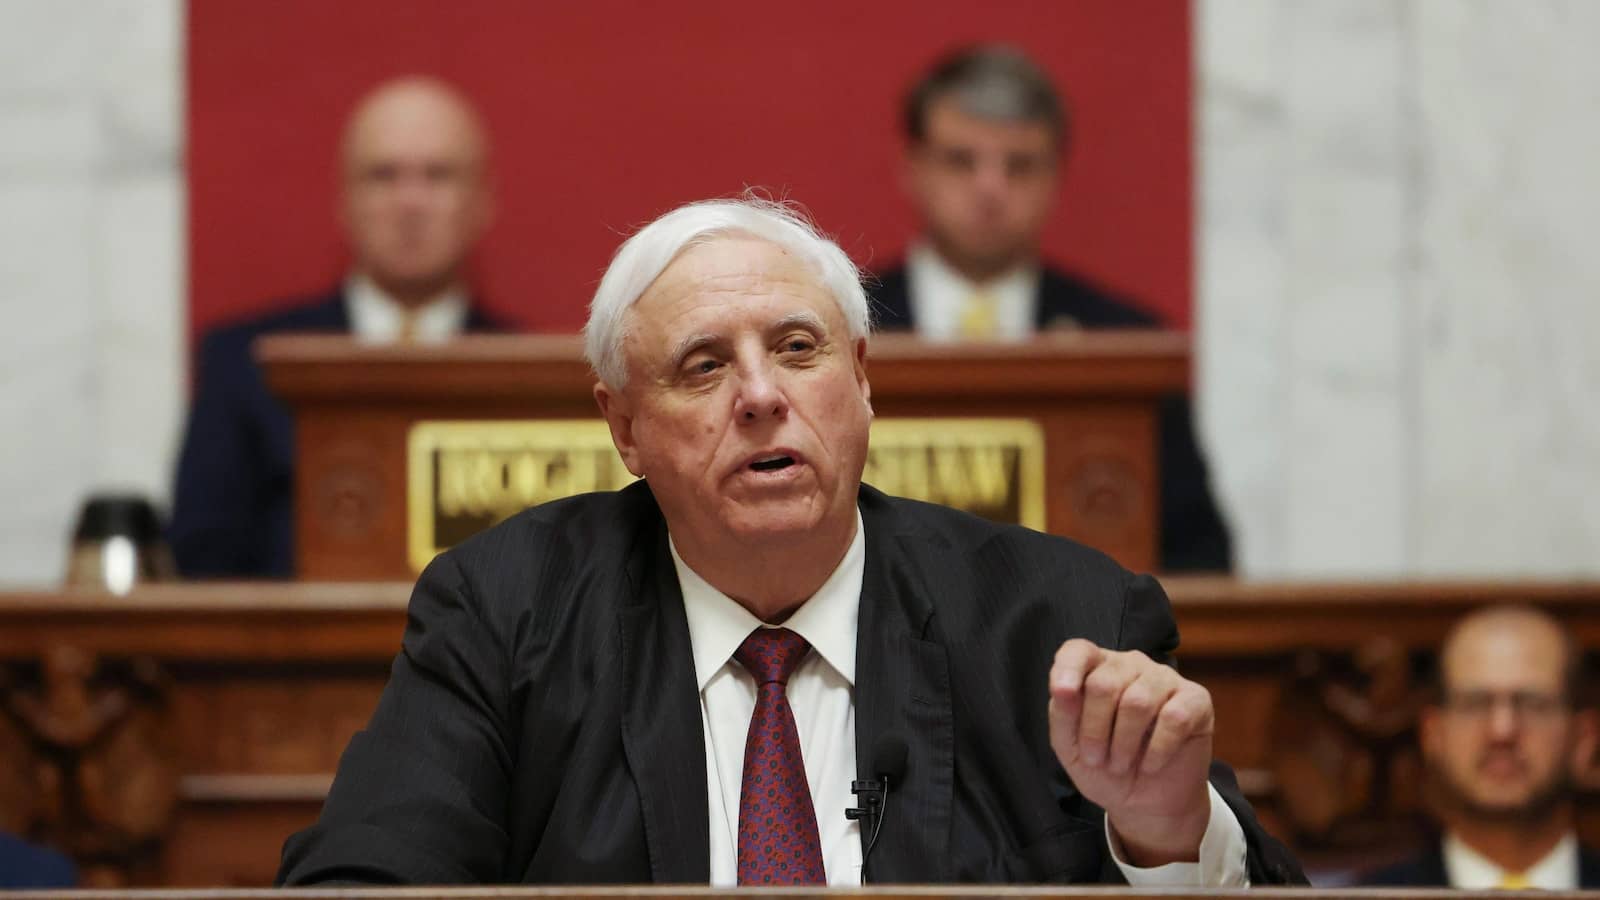 West Virginia will not face 5M COVID education funds clawback after feds OK waiver, governor says